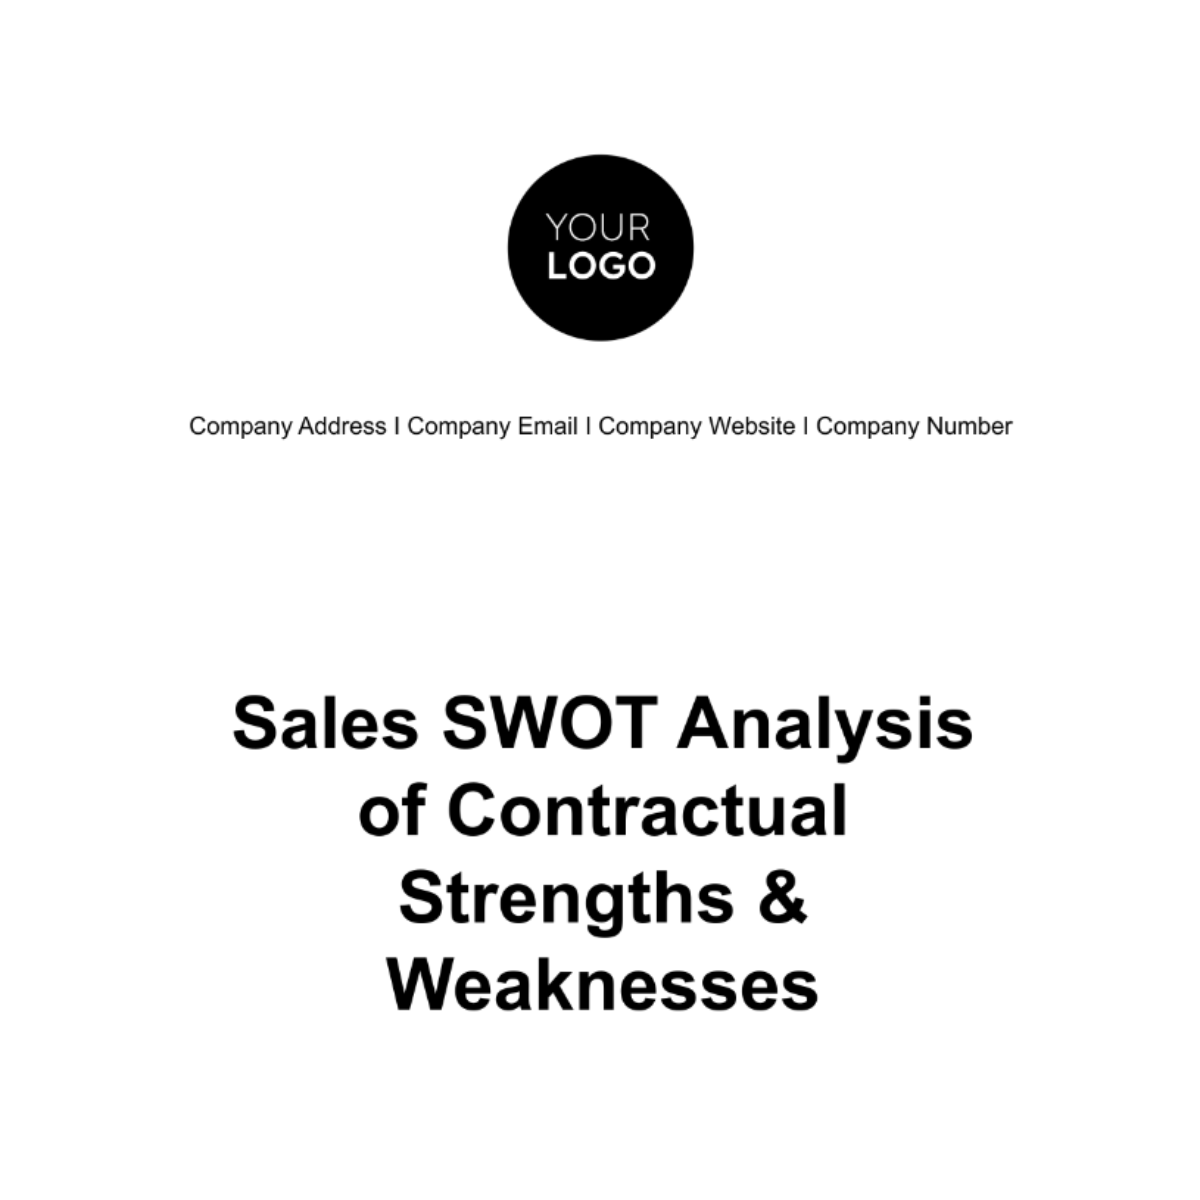 Sales SWOT Analysis of Contractual Strengths & Weaknesses Template